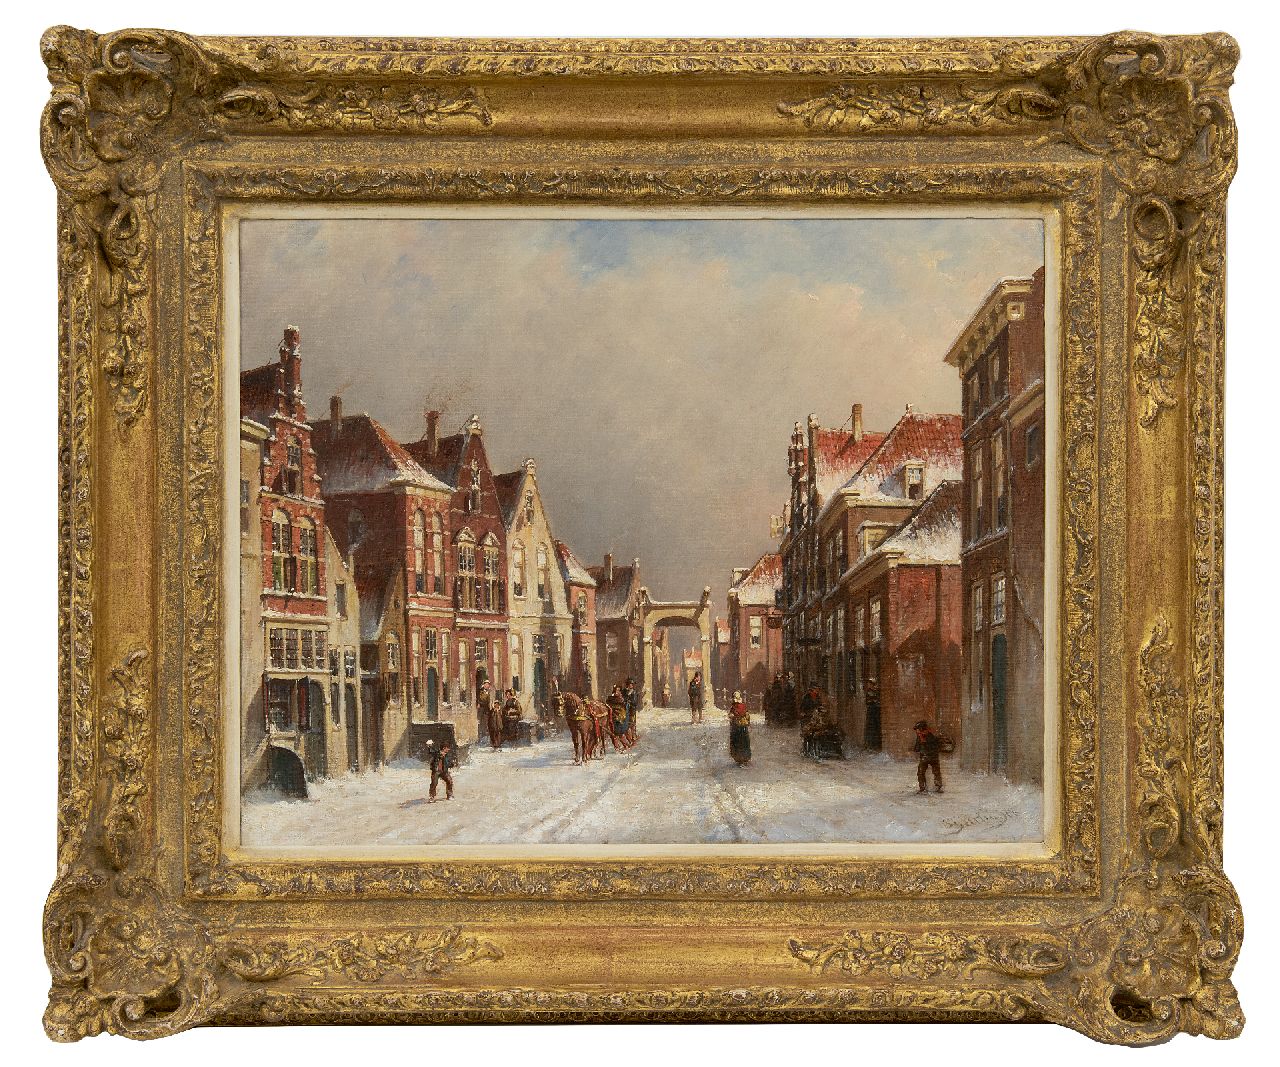 Vertin P.G.  | Petrus Gerardus Vertin | Paintings offered for sale | A snowy street with a drawbridge (possibly Edam), oil on canvas 36.3 x 45.5 cm, signed l.r. and dated '86